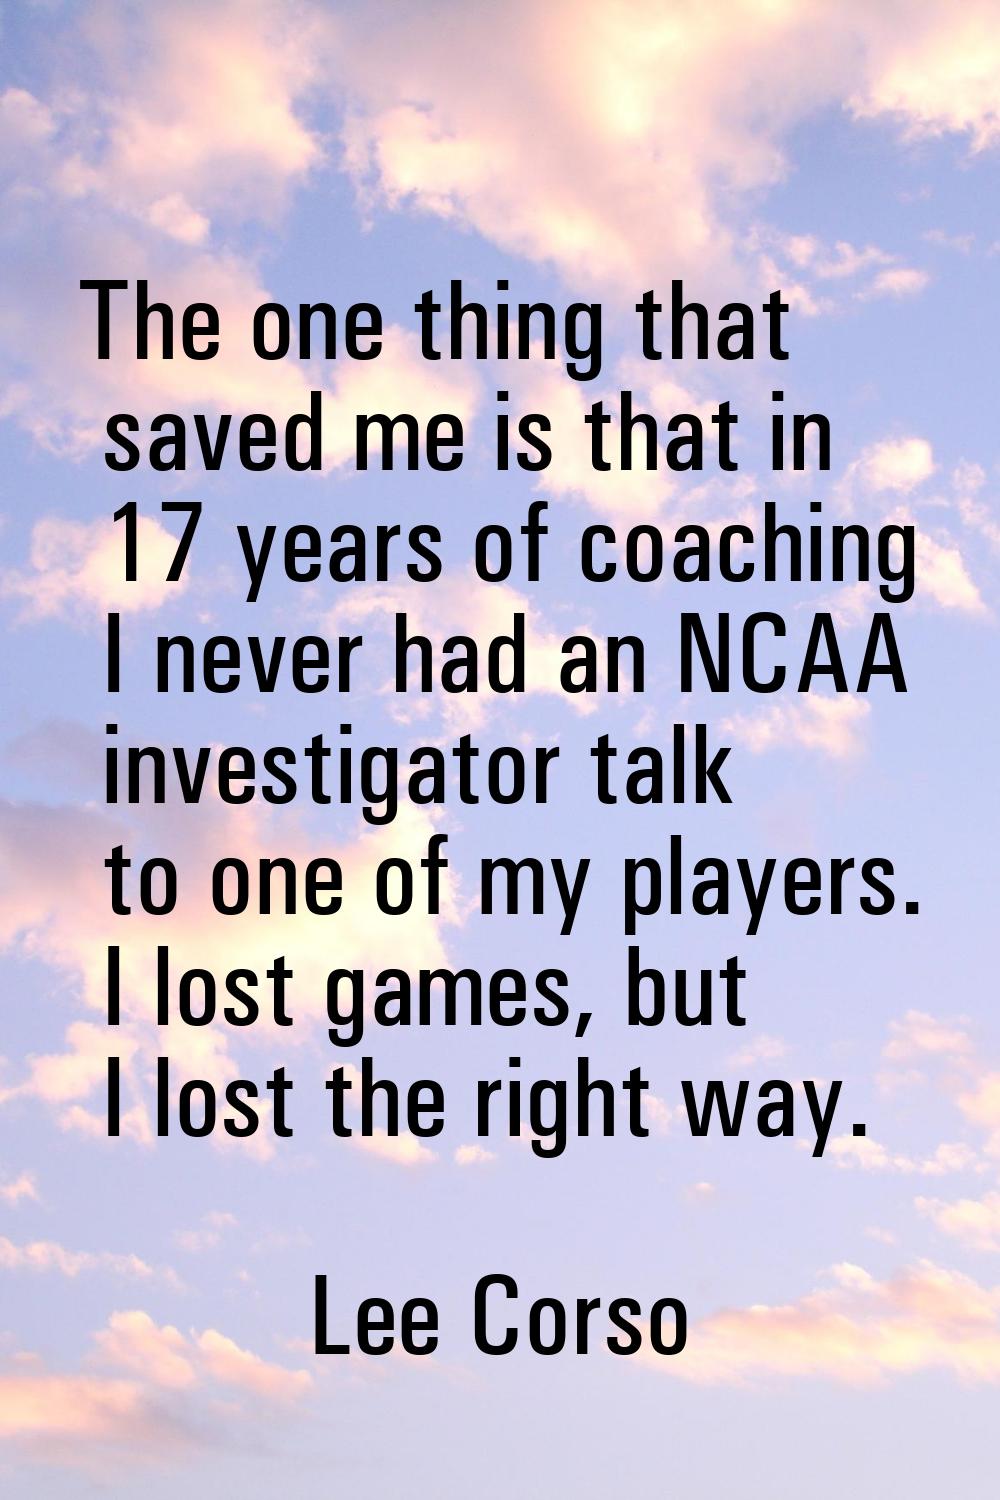 The one thing that saved me is that in 17 years of coaching I never had an NCAA investigator talk t